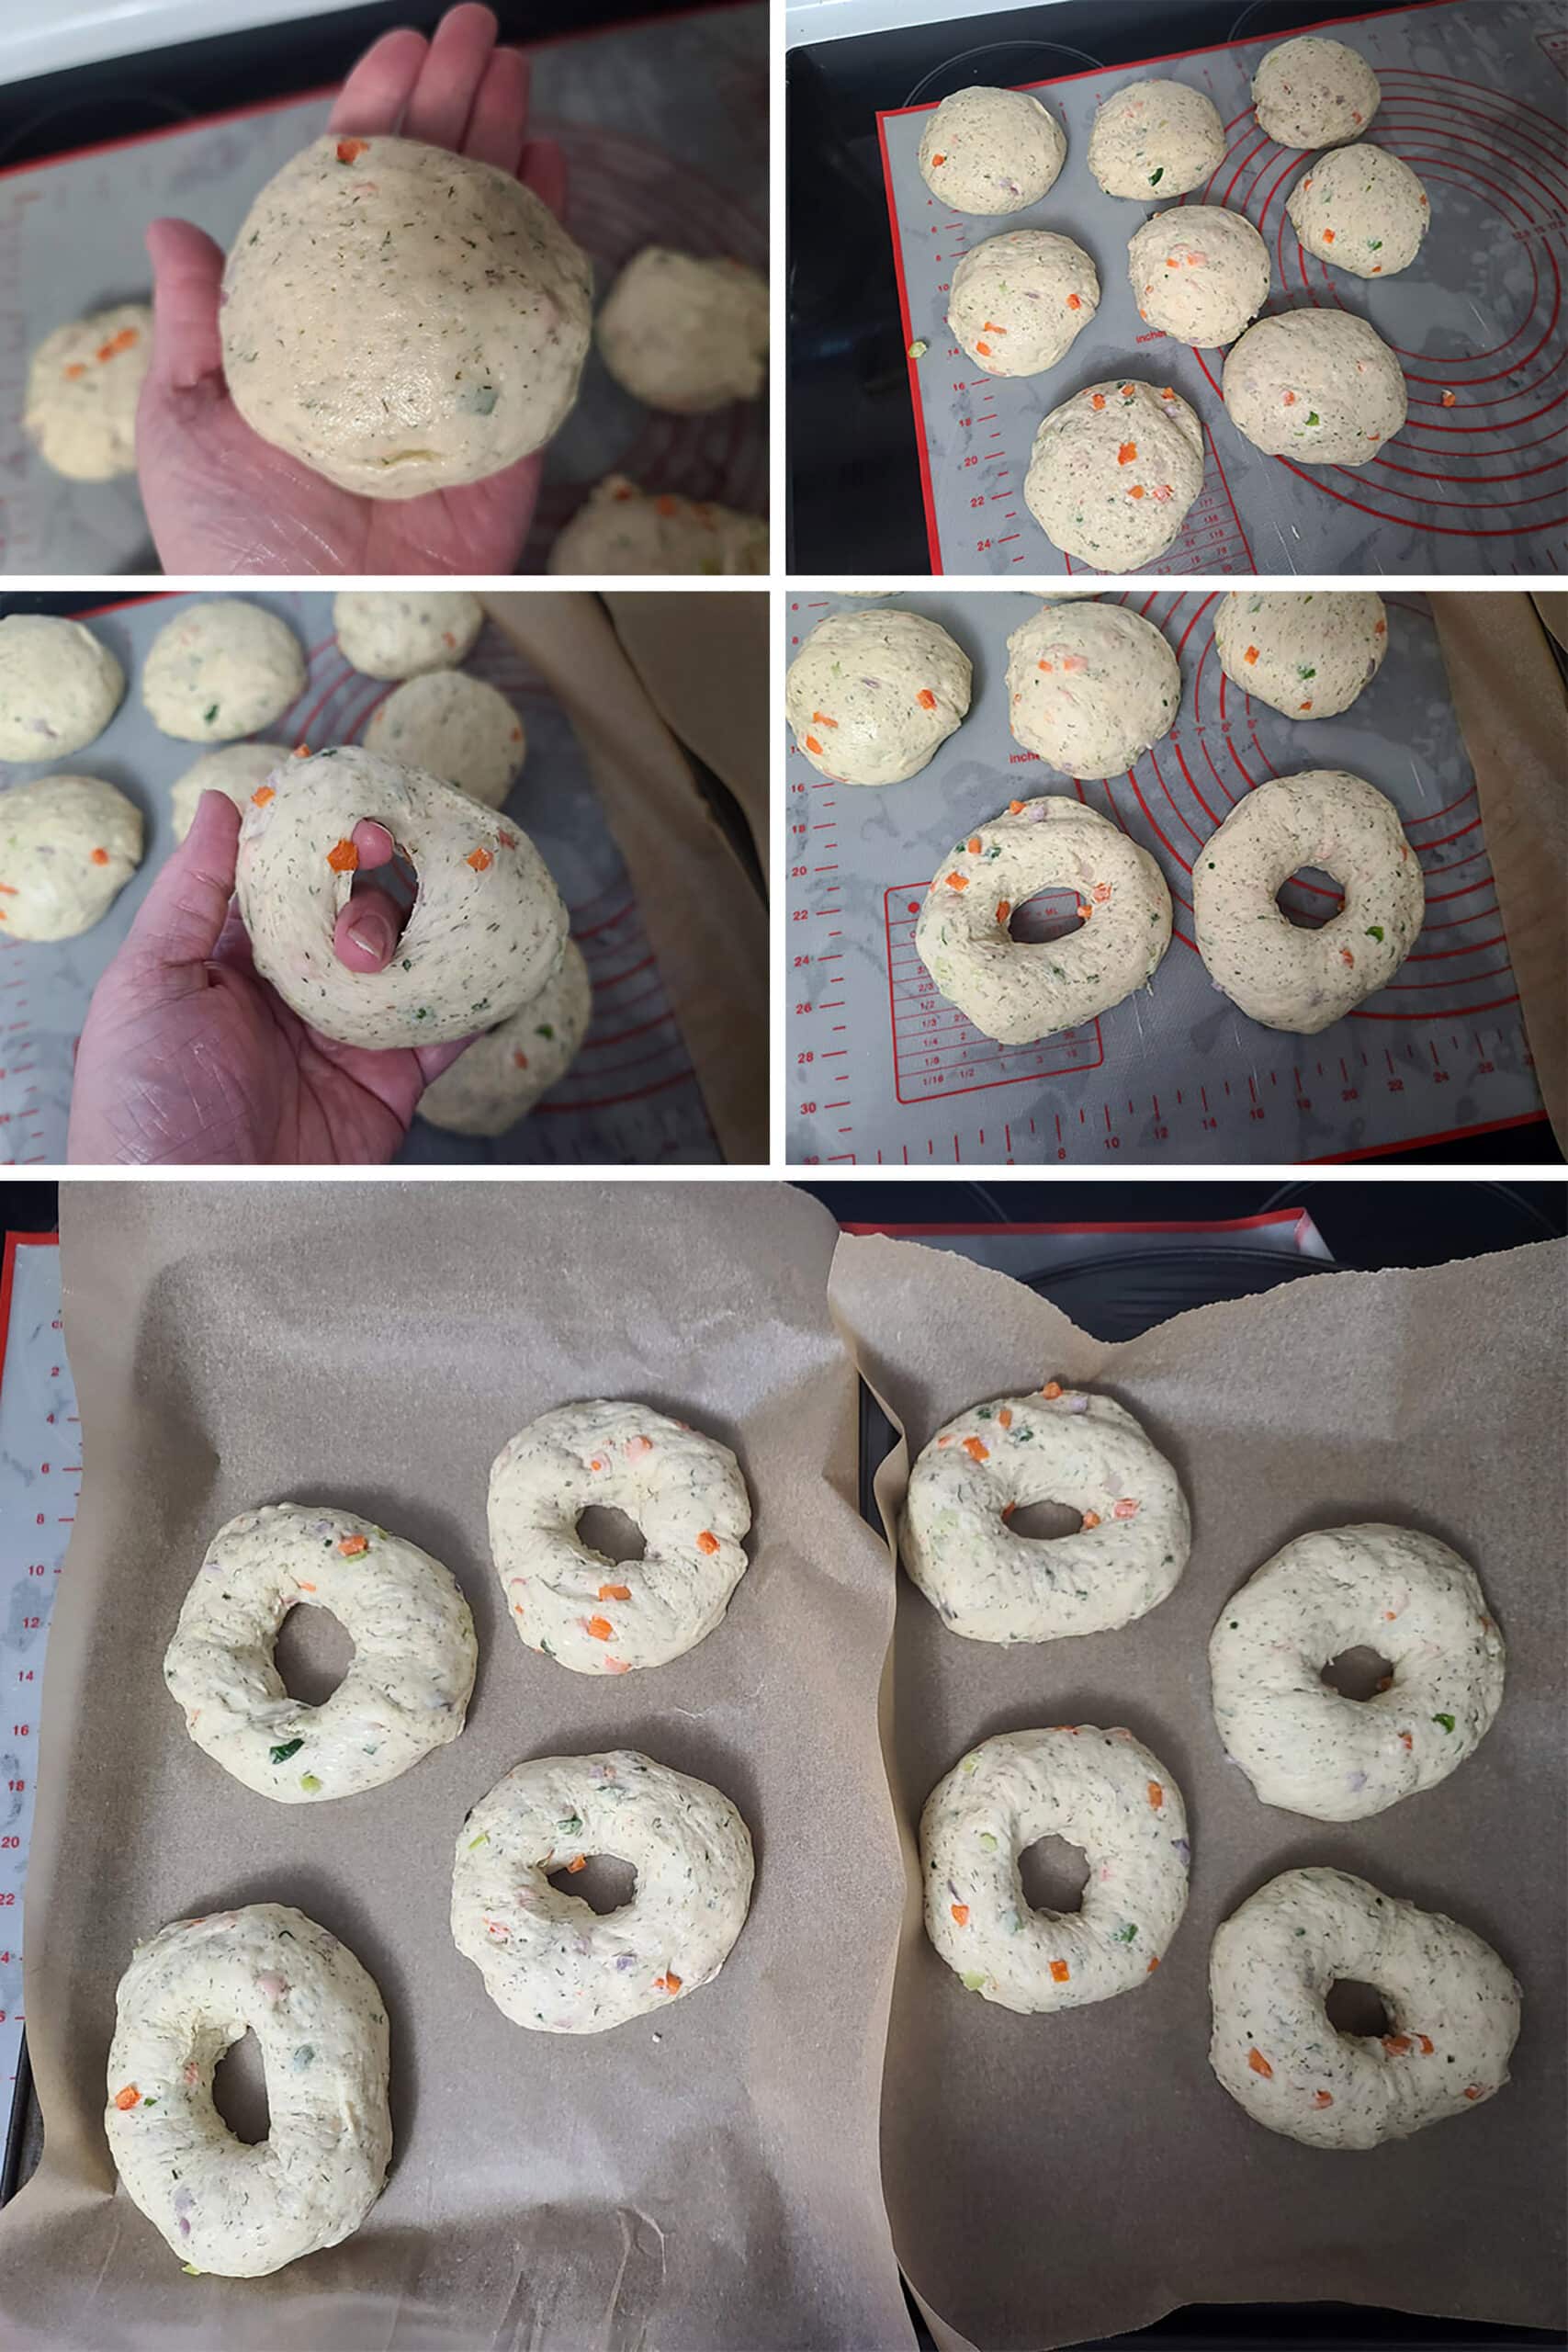 A 5 part image showing the dough pieces being rolled into balls and formed into bagels.